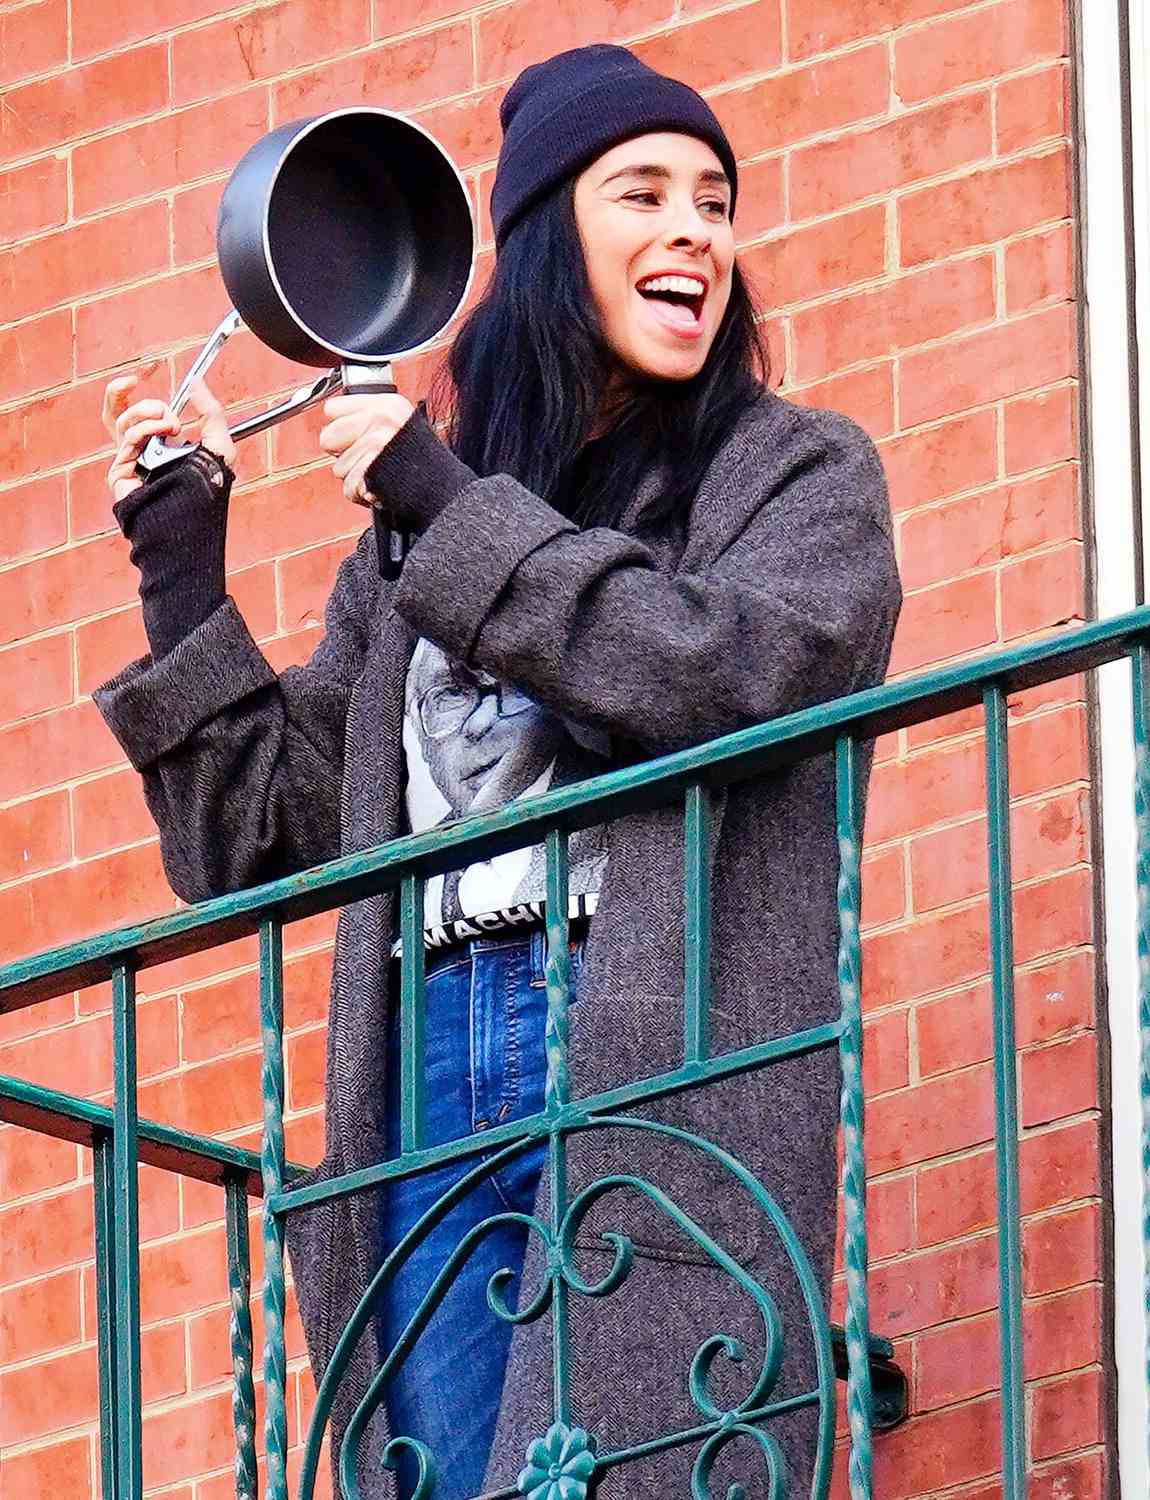 Sarah Silverman cheers on front line workers from a balcony on April 20, 2020 in New York City